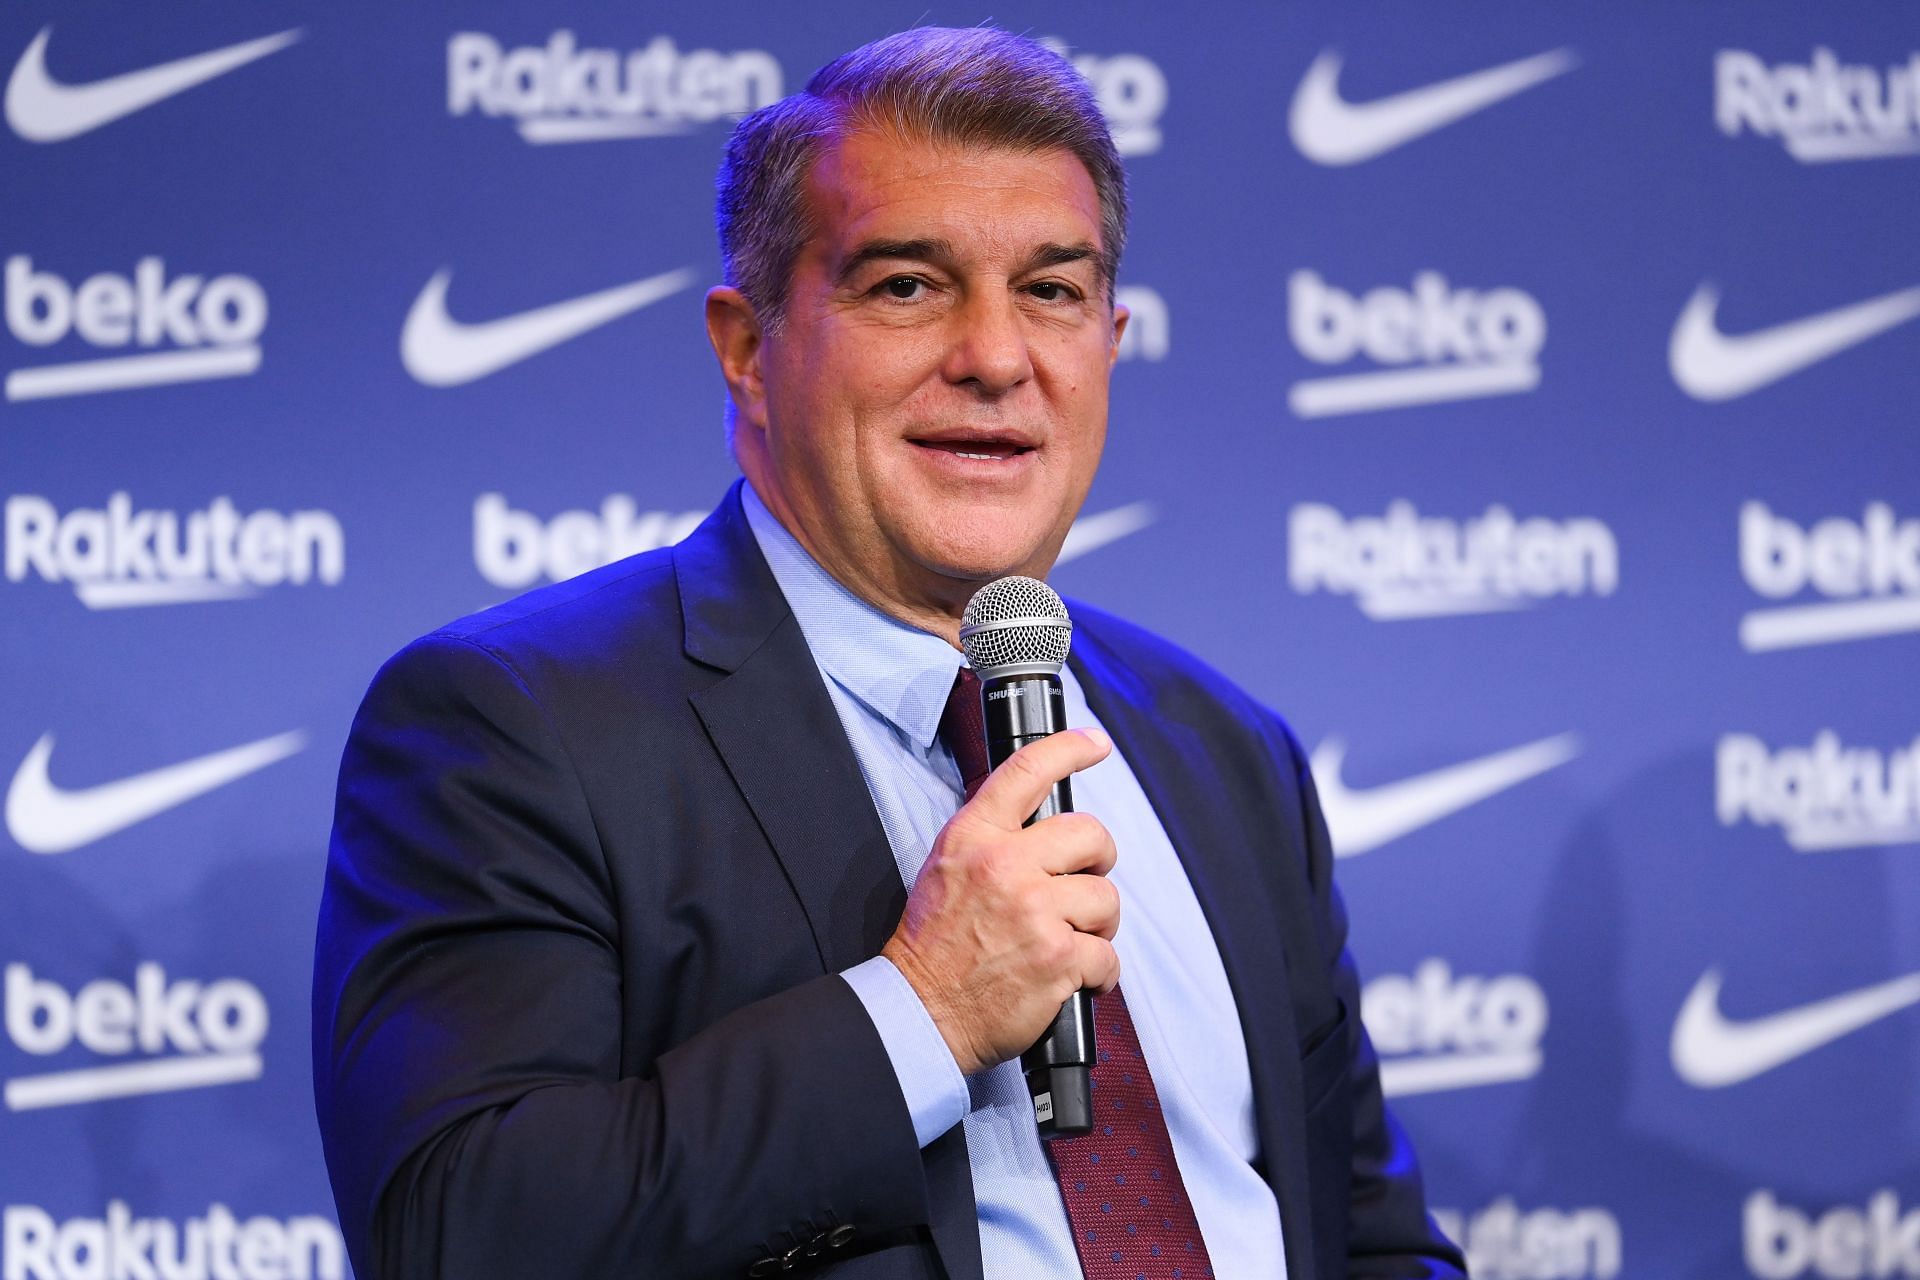 Barcelona president Joan Laporta has ruled out the possibility of a move for the PSG superstar